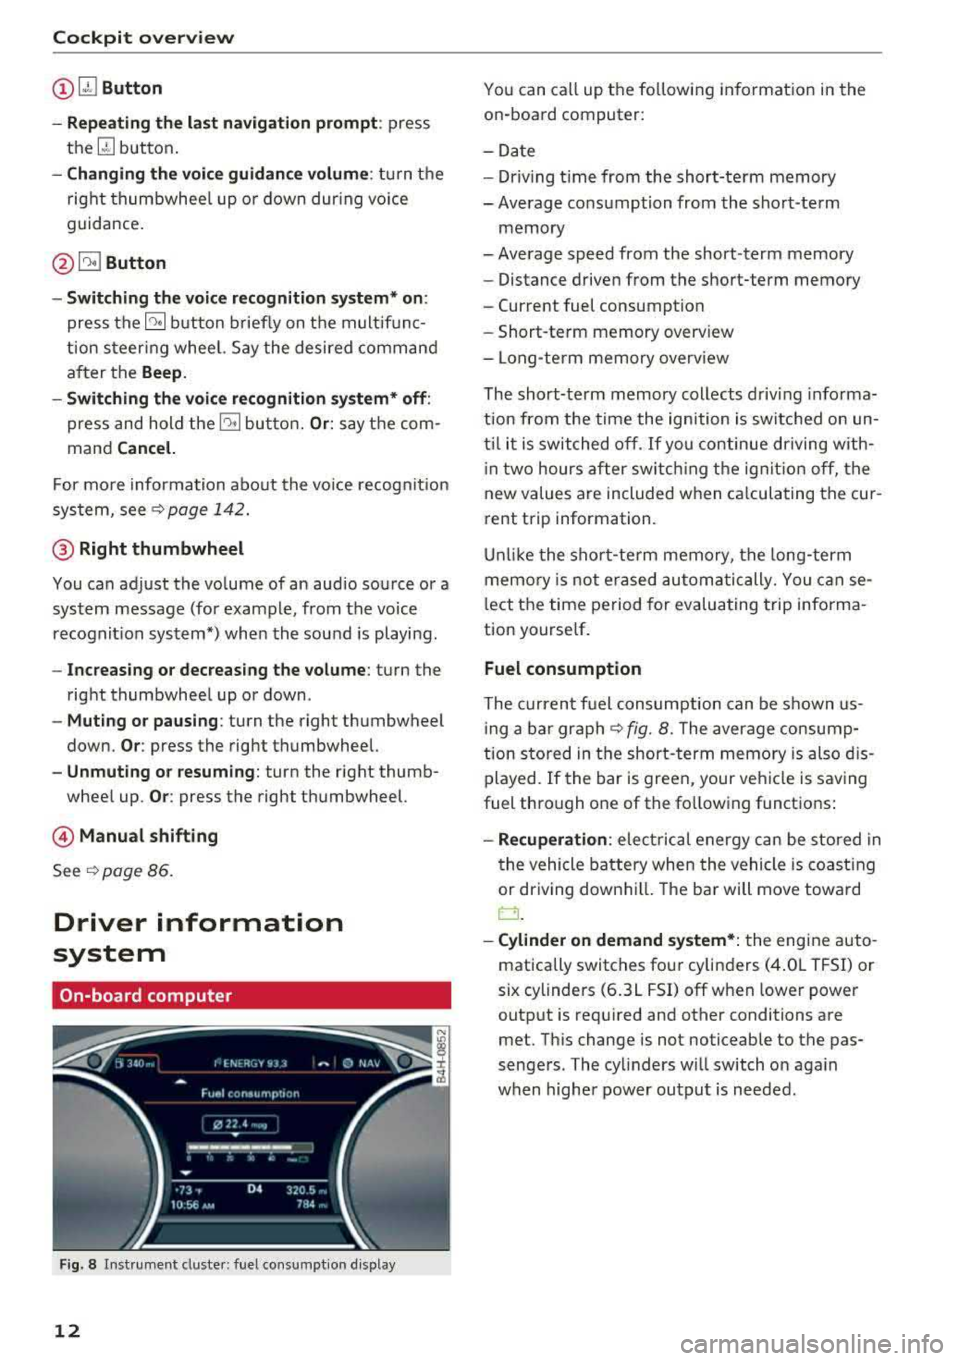 AUDI A8 2018  Owners Manual Cockpit overv iew 
(D G!J Button 
- Repeating  th e la st  na vig ation  prom pt : 
press 
the 
[J] button. 
- Changing the  voice guidance  volume : turn  the 
right  thumbwhee l up  o r down  dur in